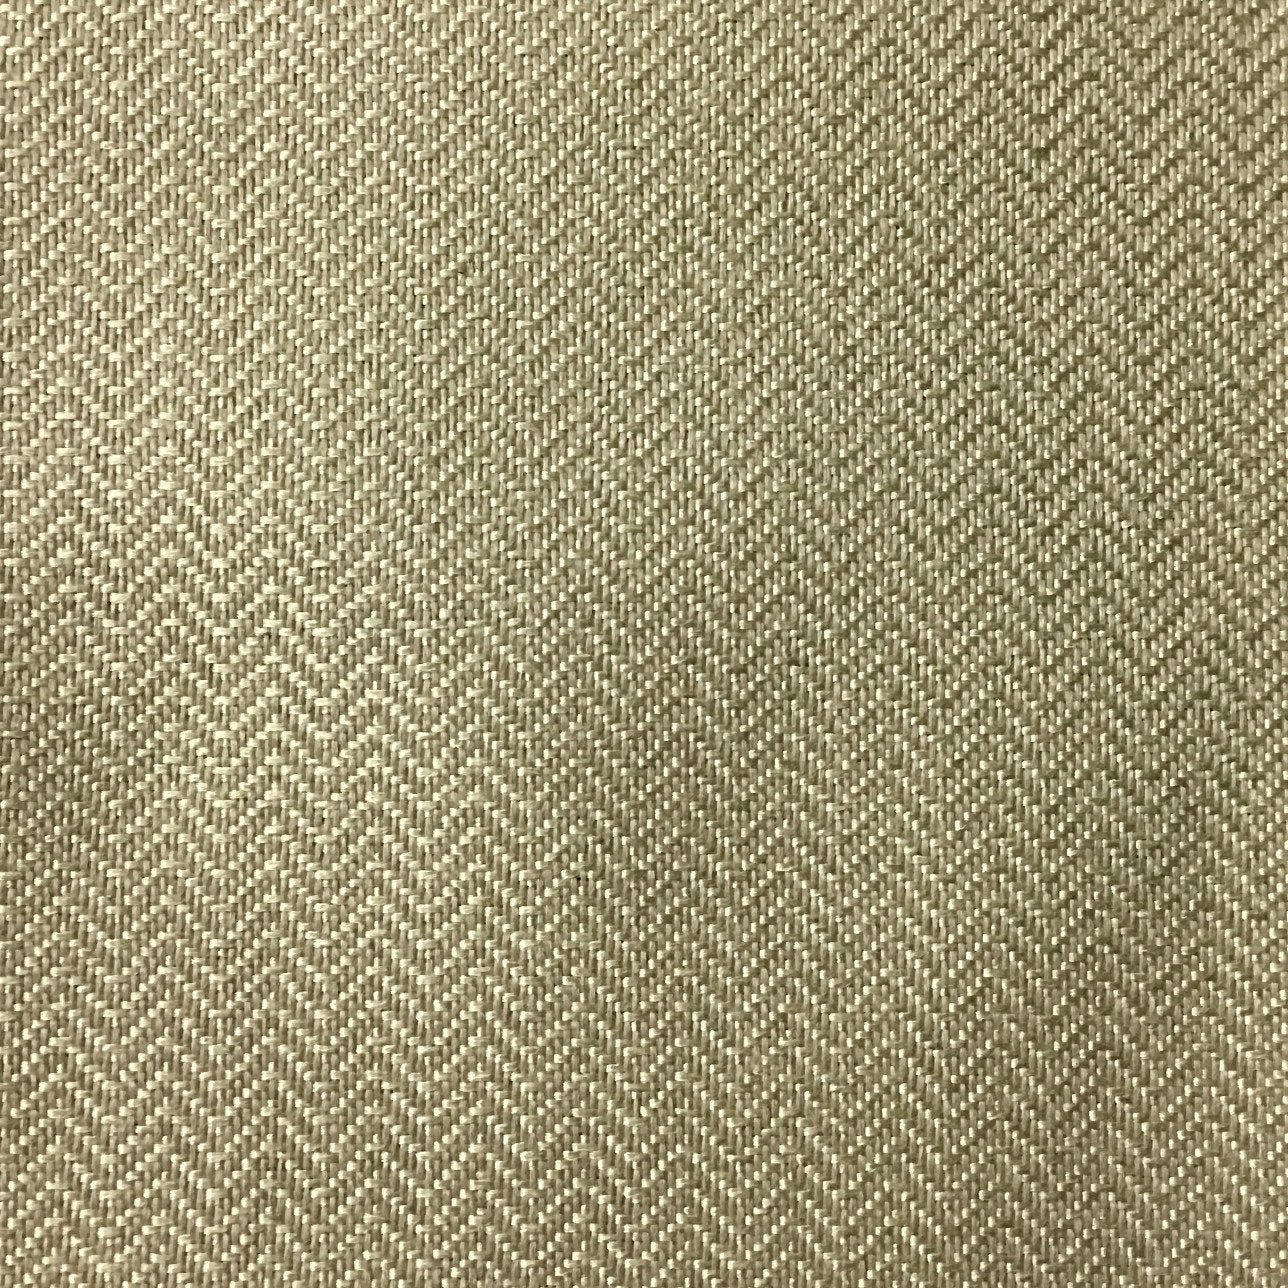 OctoRose Thick Durable Upholstery Sewing Fabrics Order by Yard